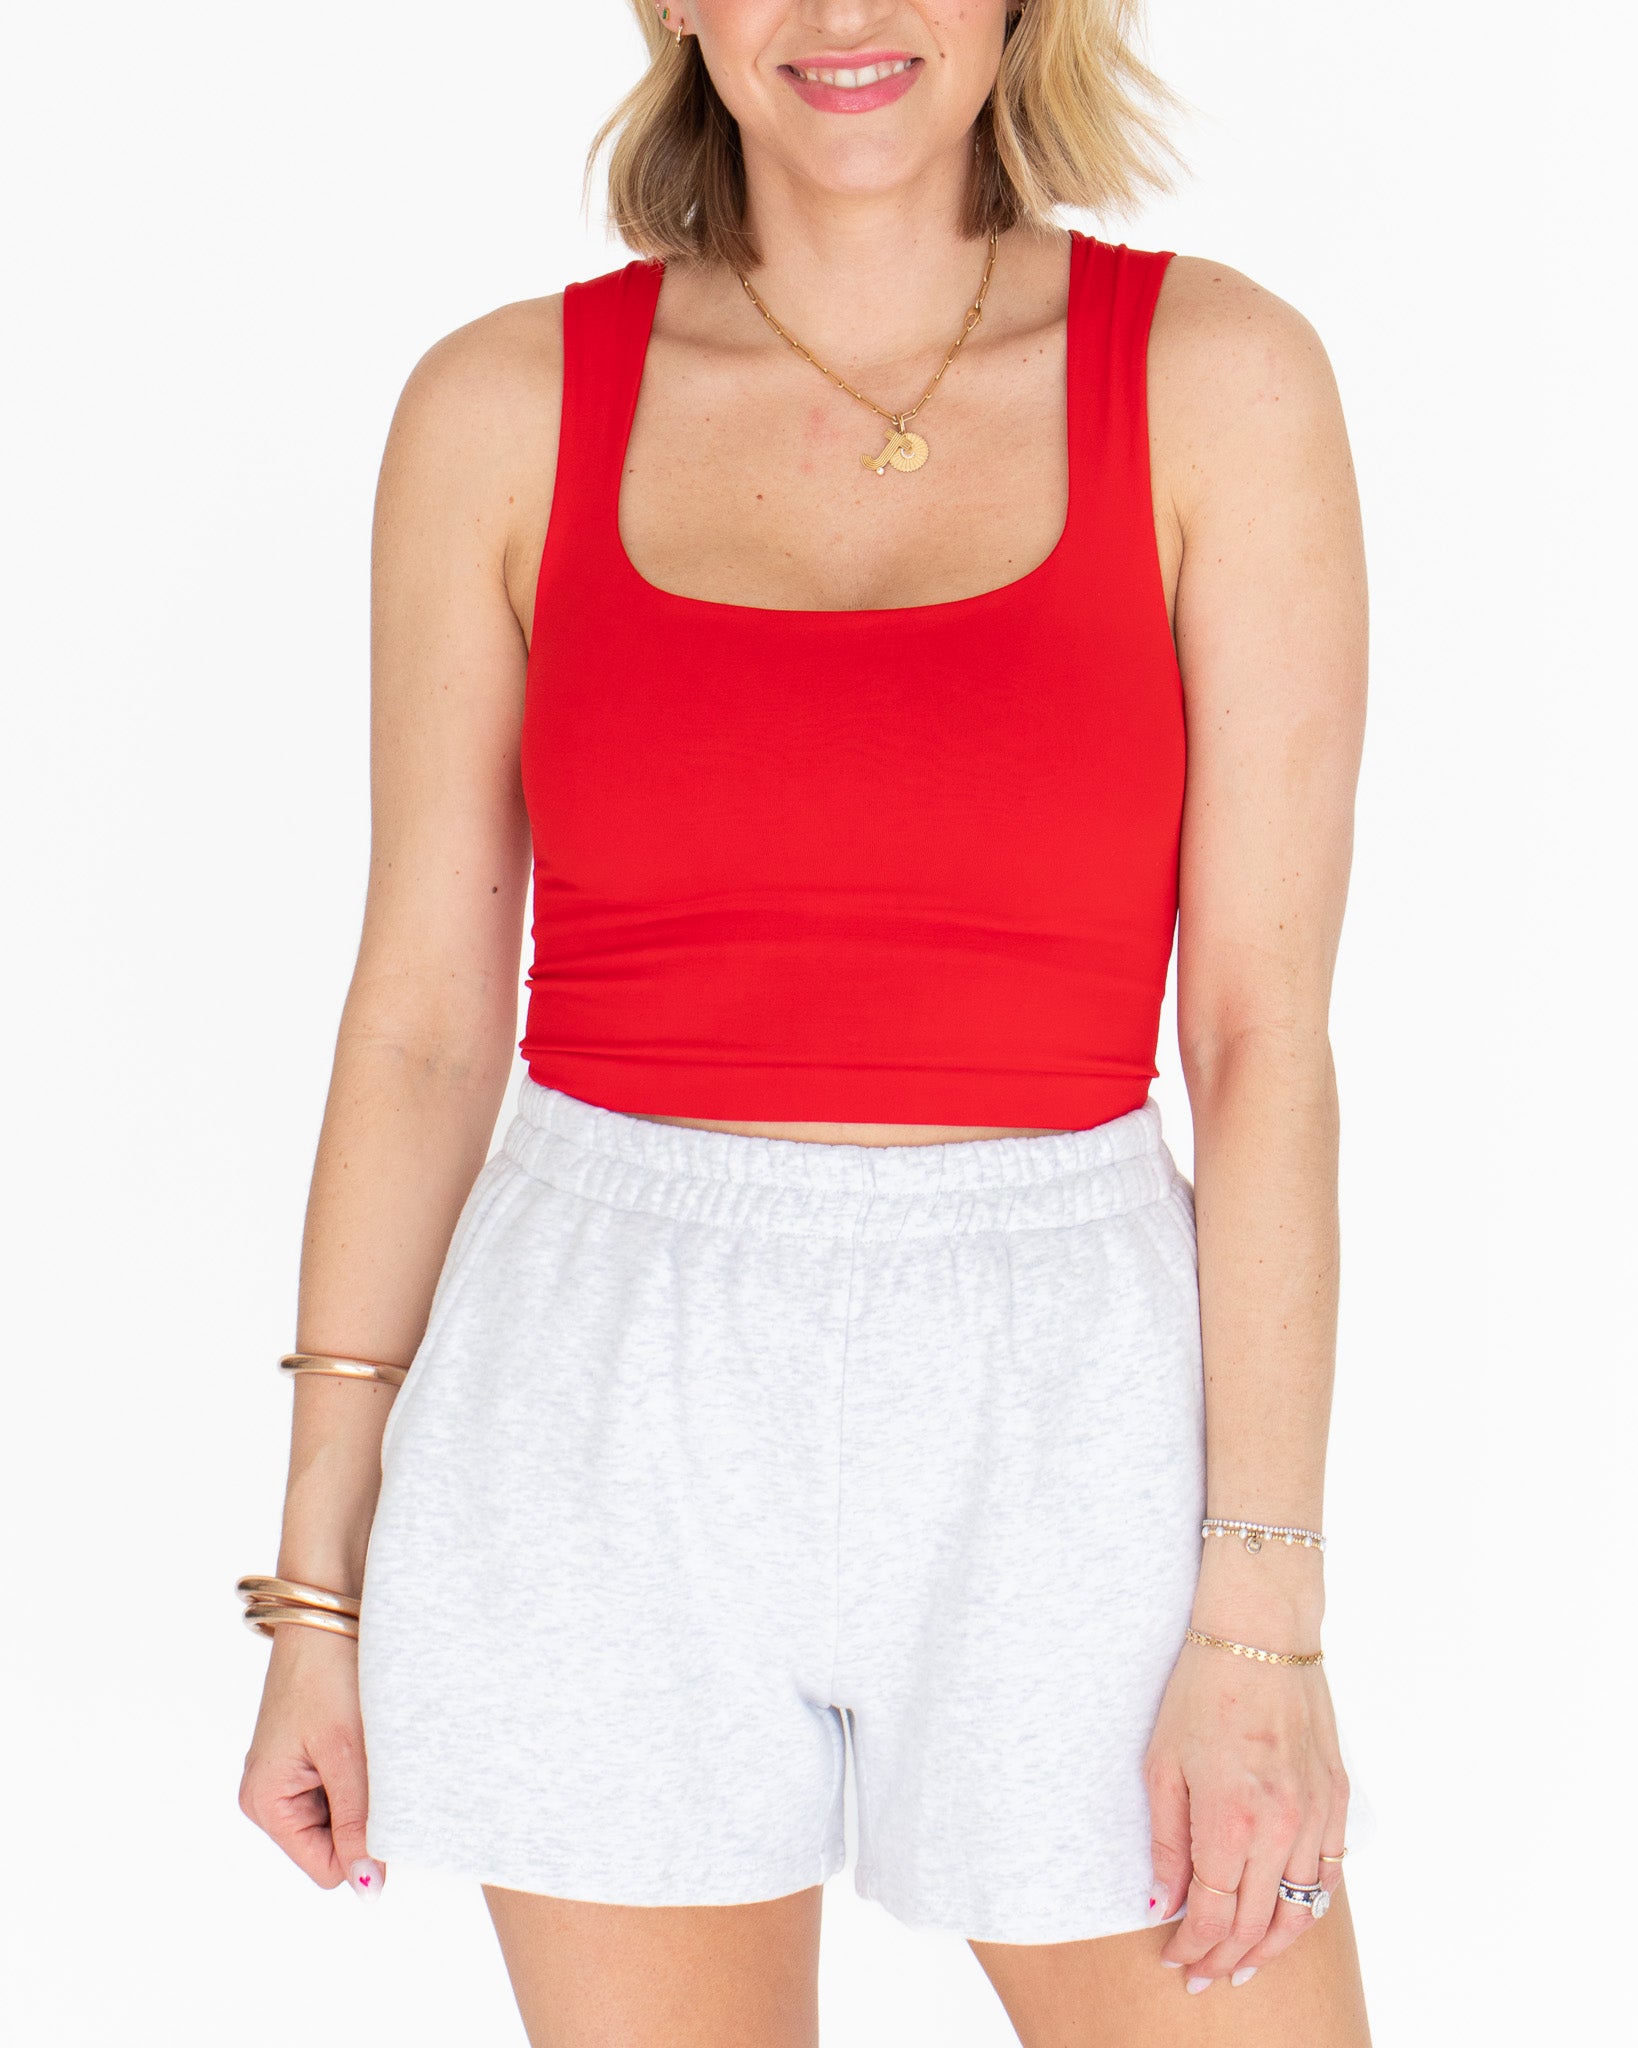 Clean Line Square Neck Top - Red